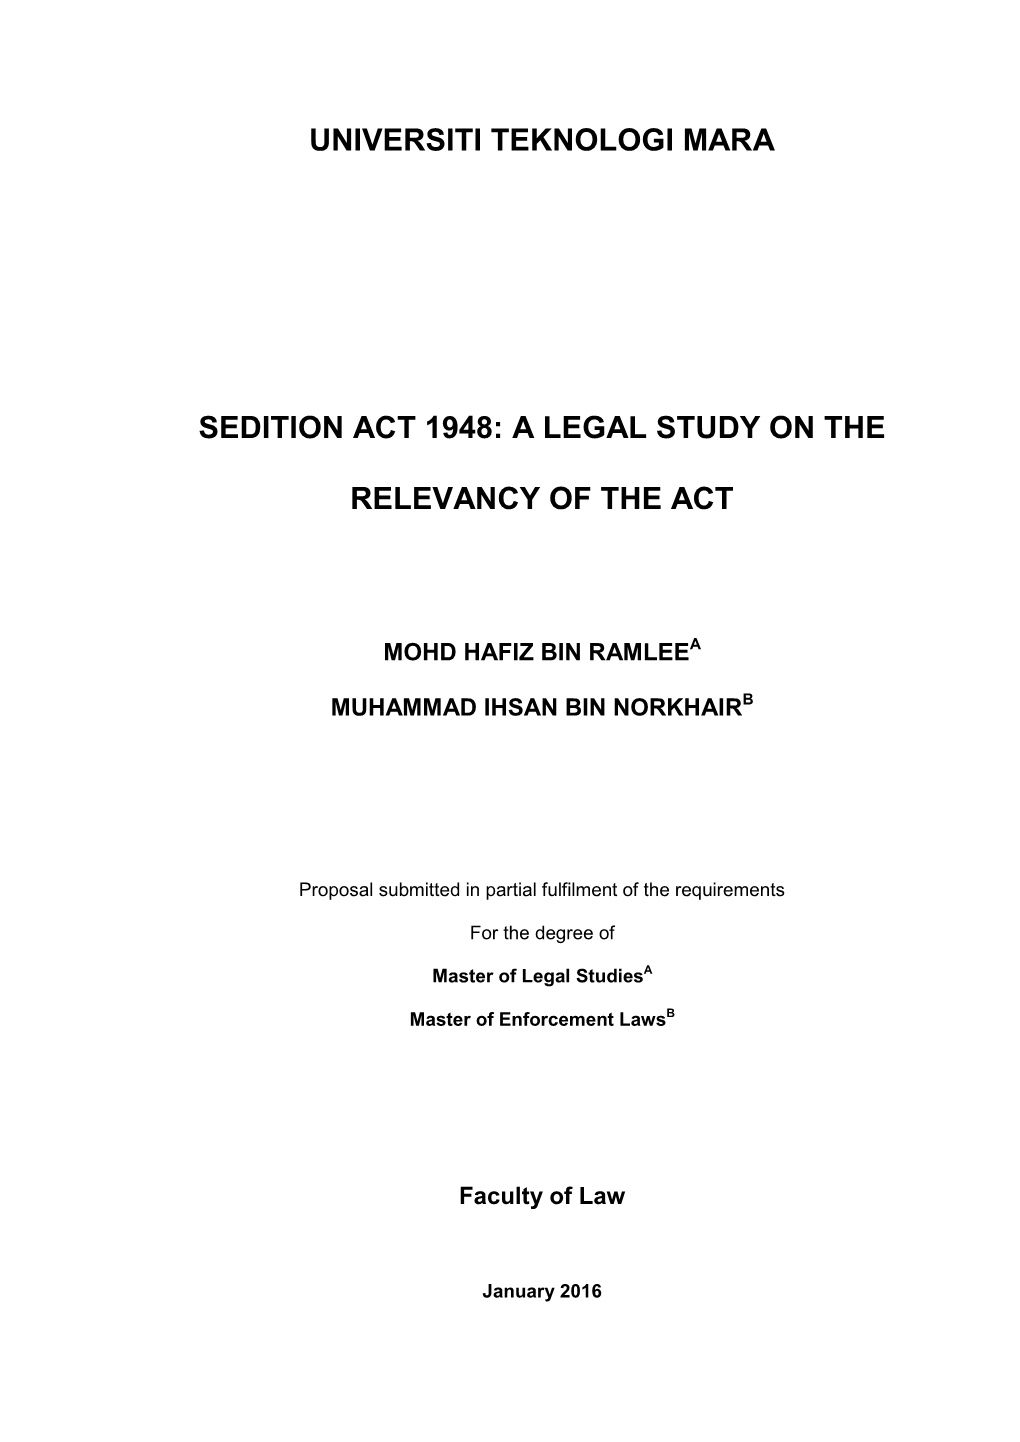 Sedition Act 1948: a Legal Study on the Relevancy of the Act